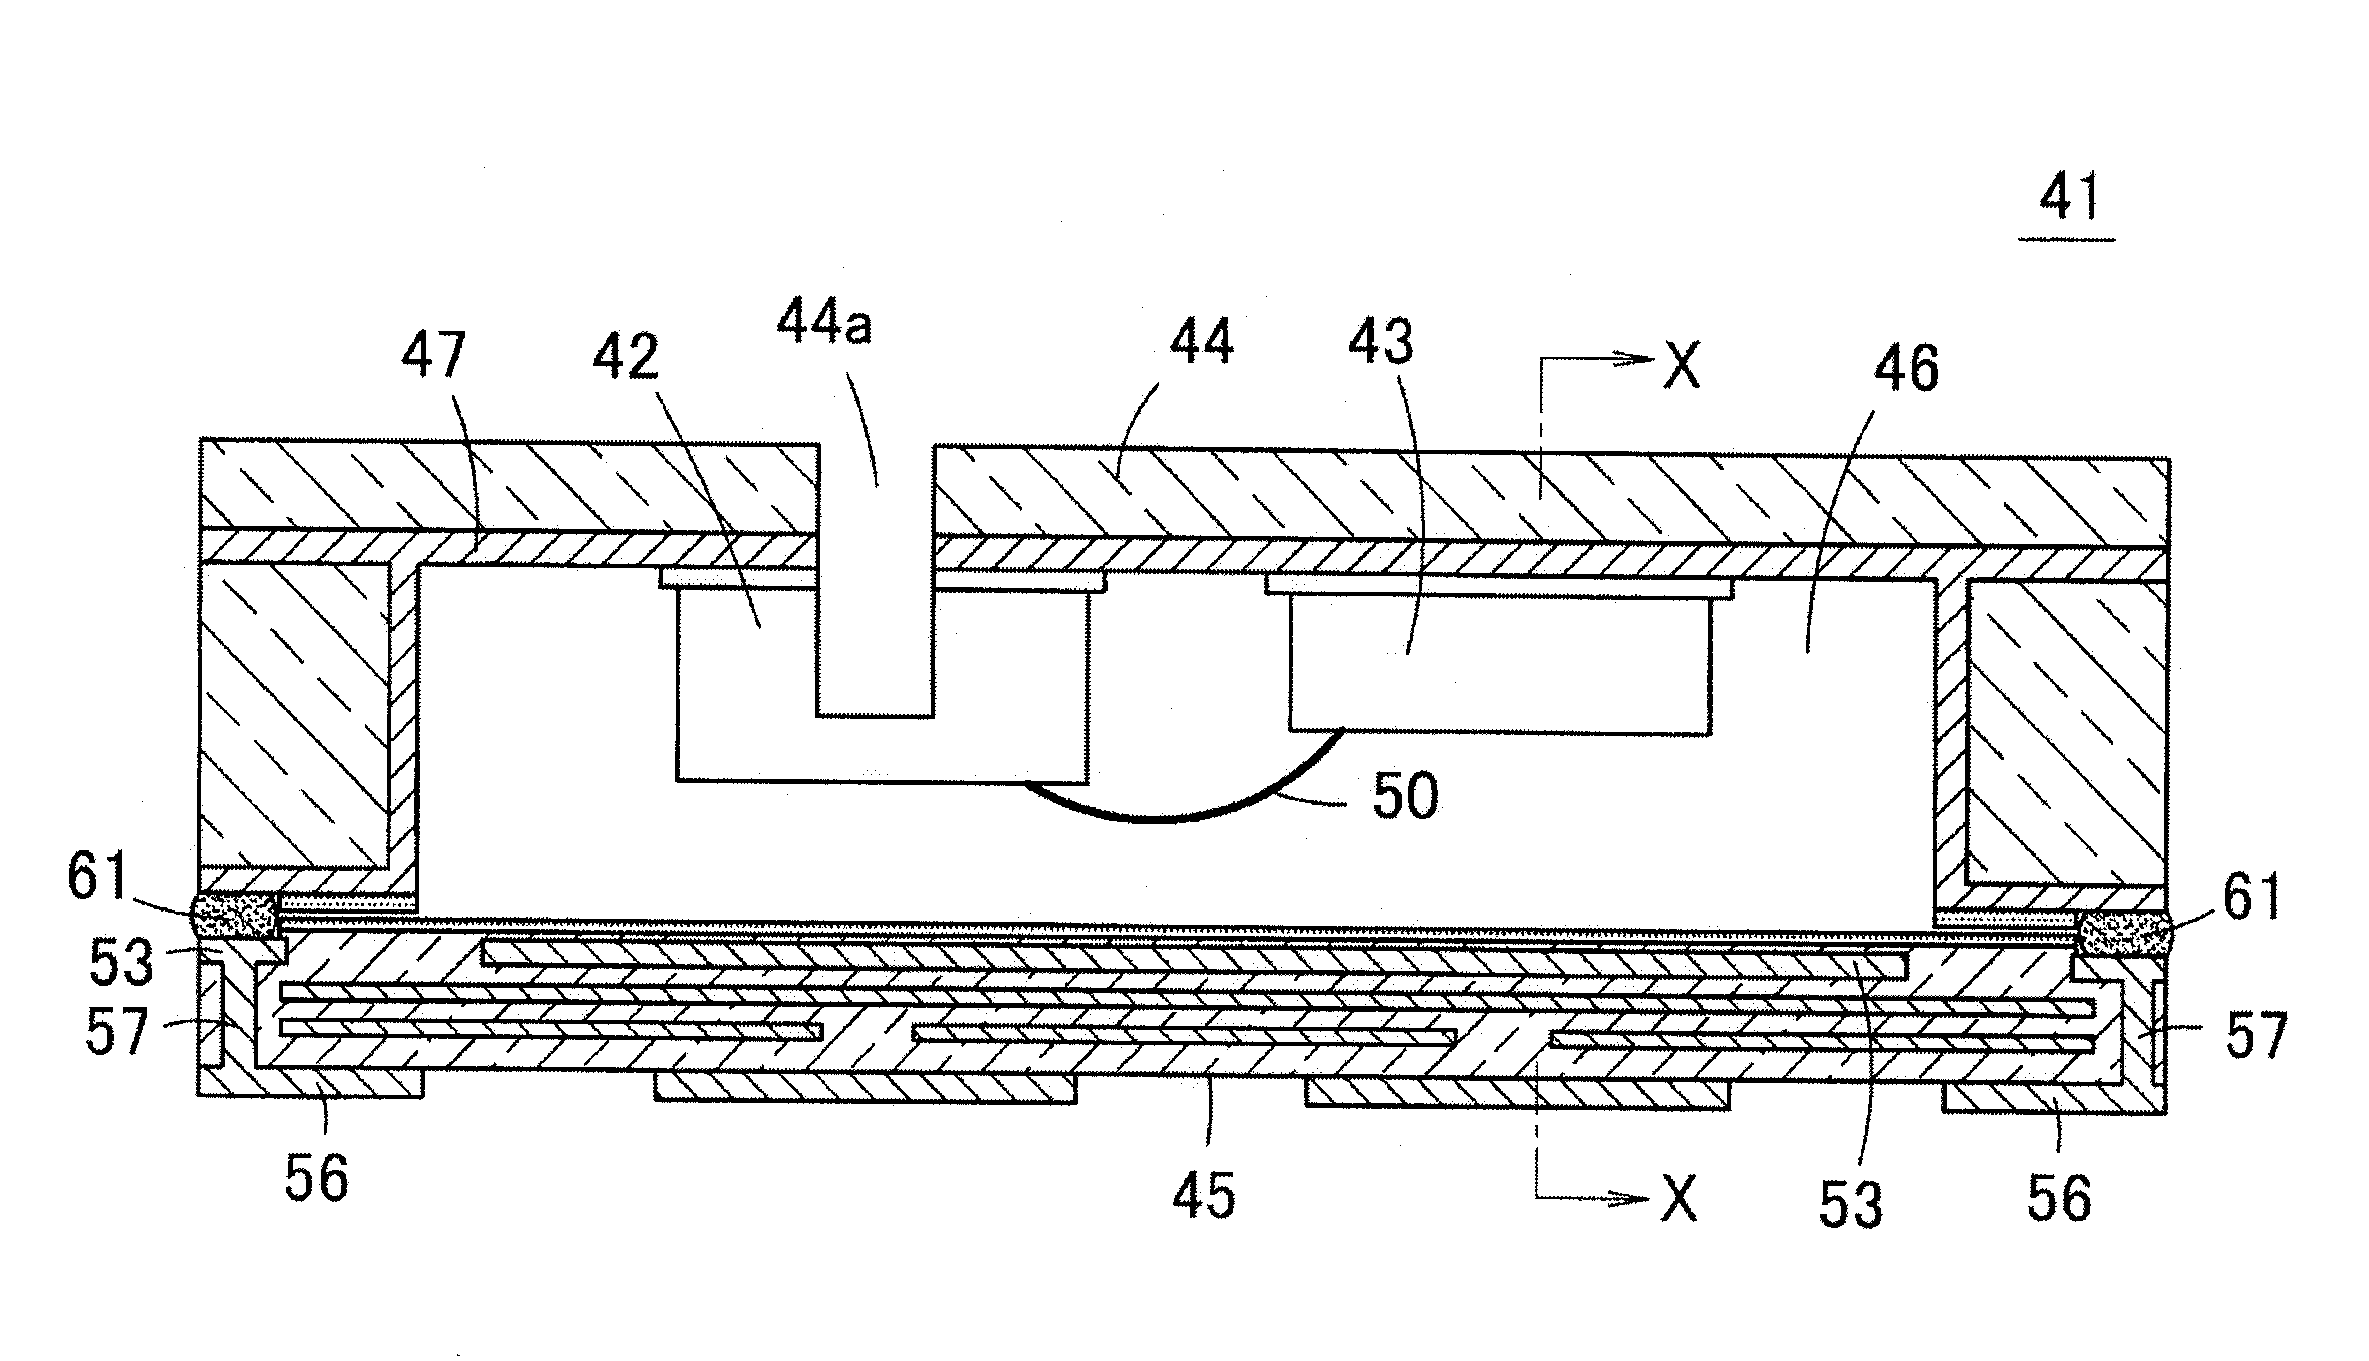 Semiconductor device and microphone